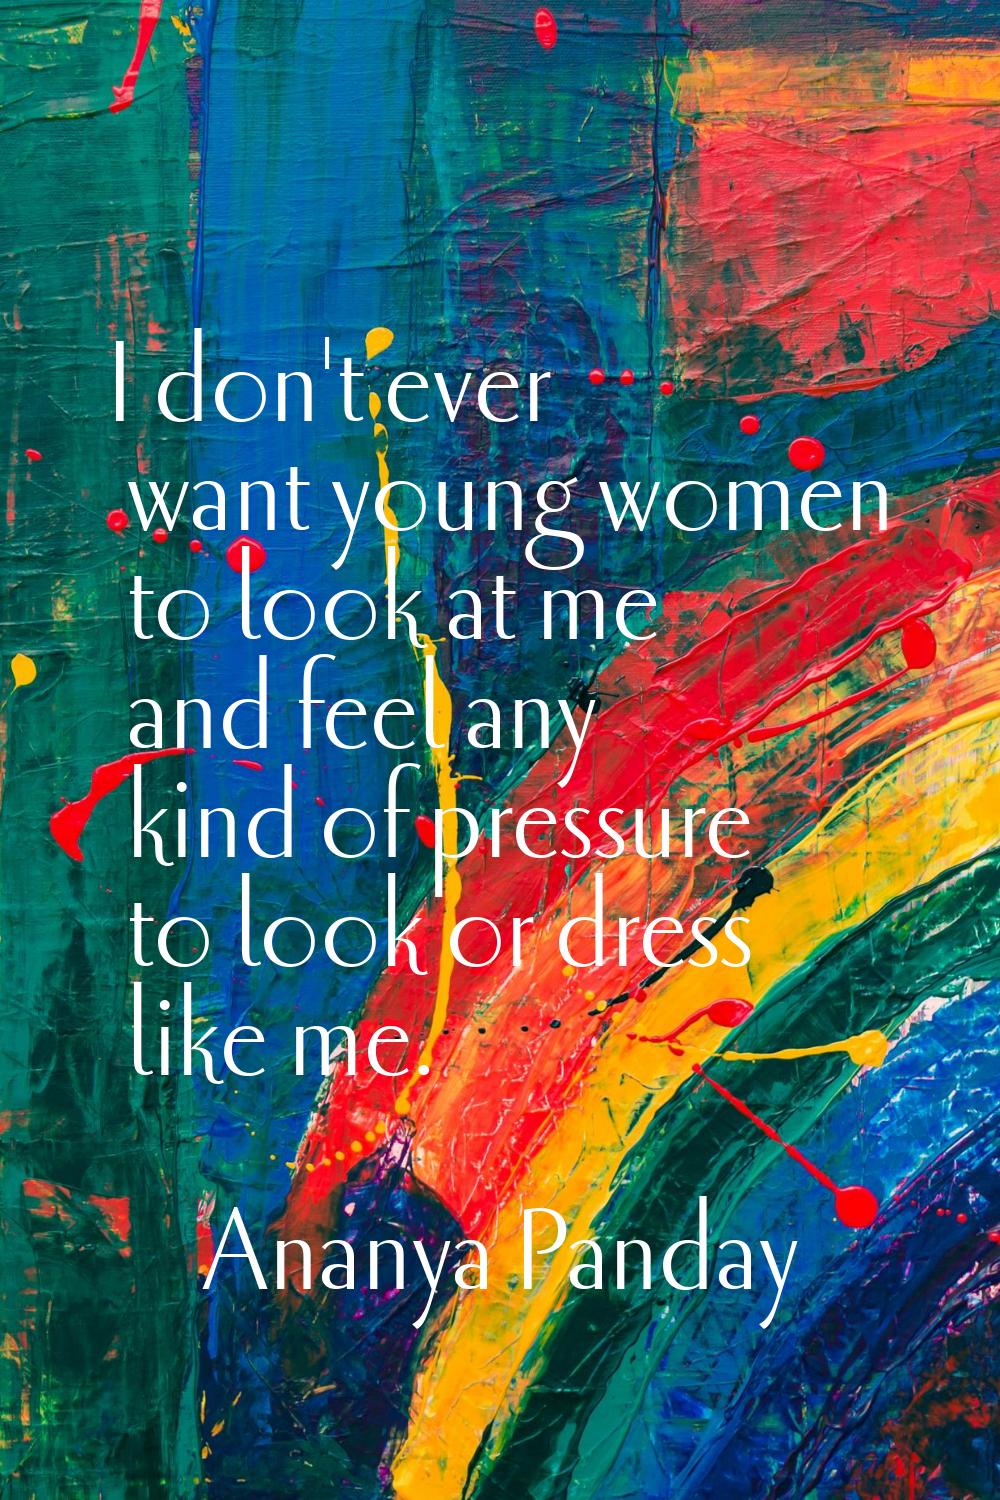 I don't ever want young women to look at me and feel any kind of pressure to look or dress like me.